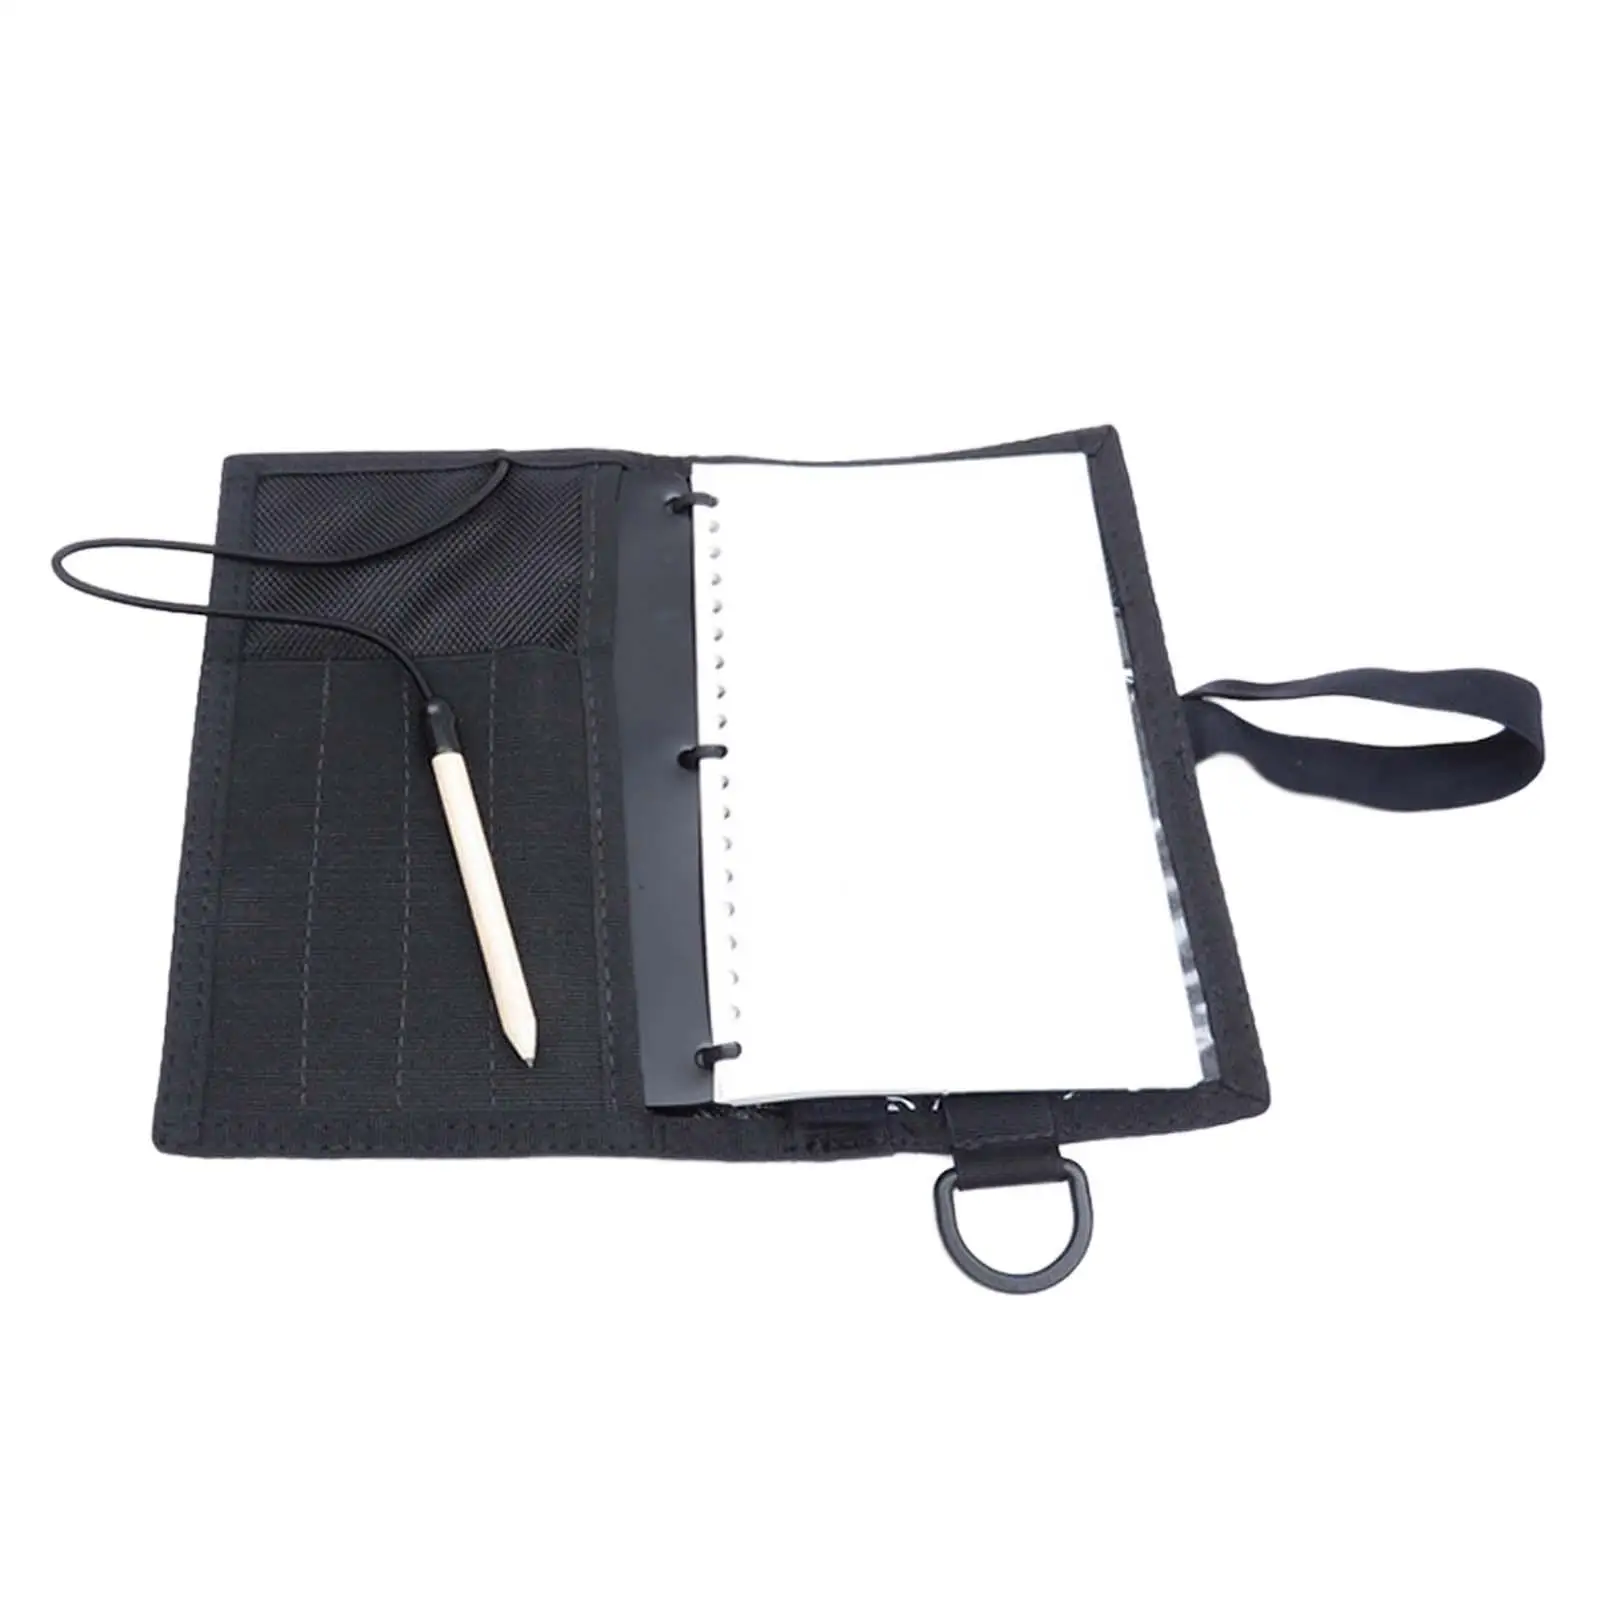 Underwater Writing Slate with Lanyard Diving Notebook for Snorkeling Making Some Notes Underwater Water Sports Scuba Swimming